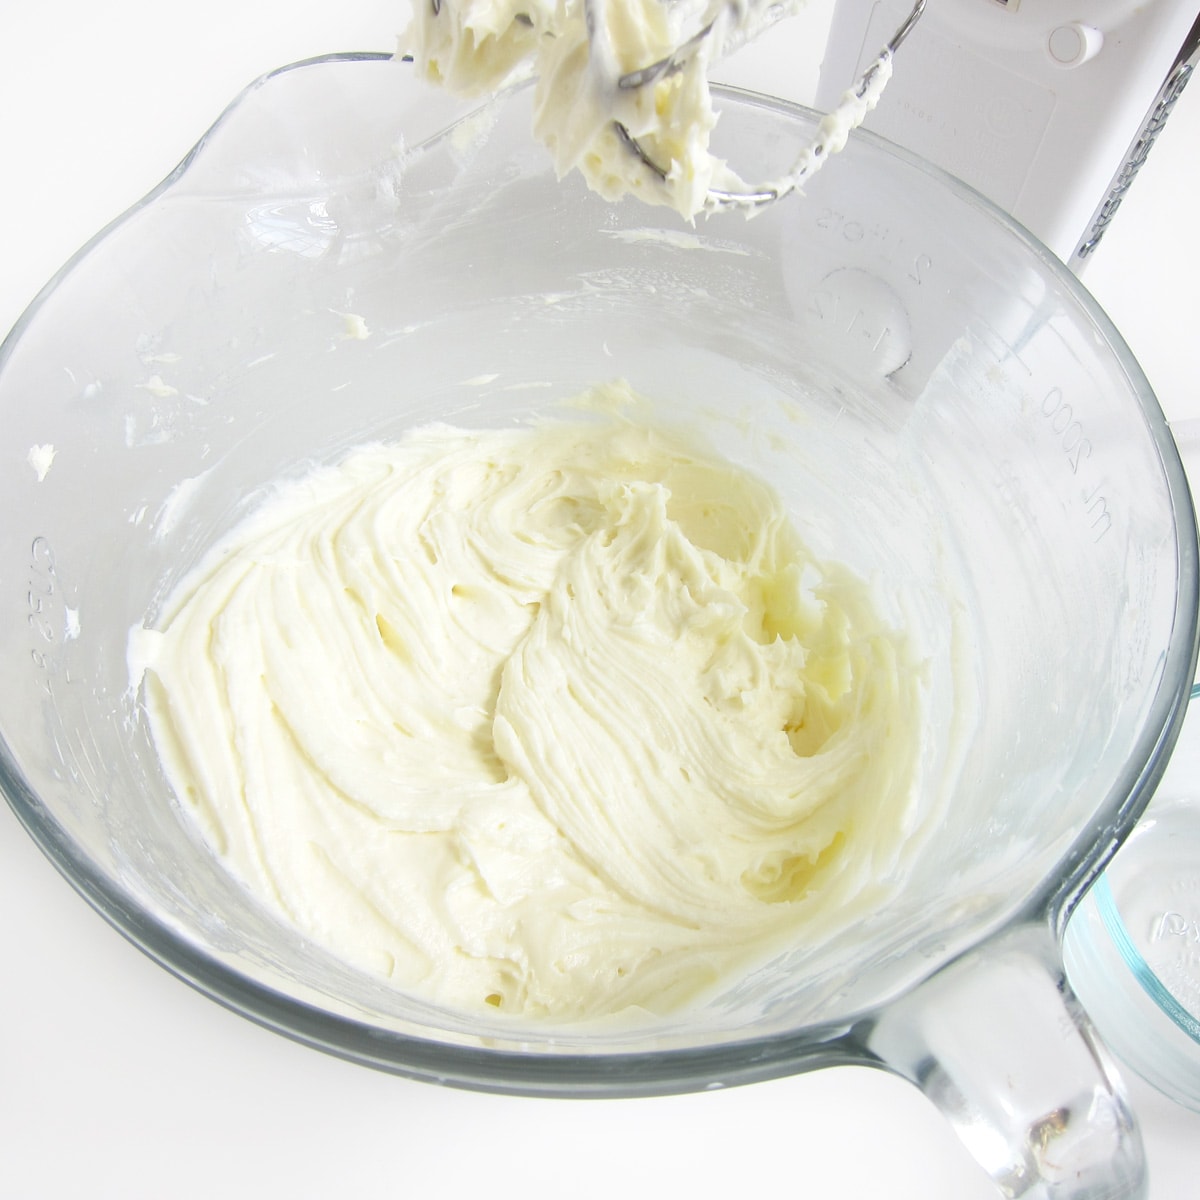 Cream cheese and sugar beaten until creamy in a mixing bowl with mixer.